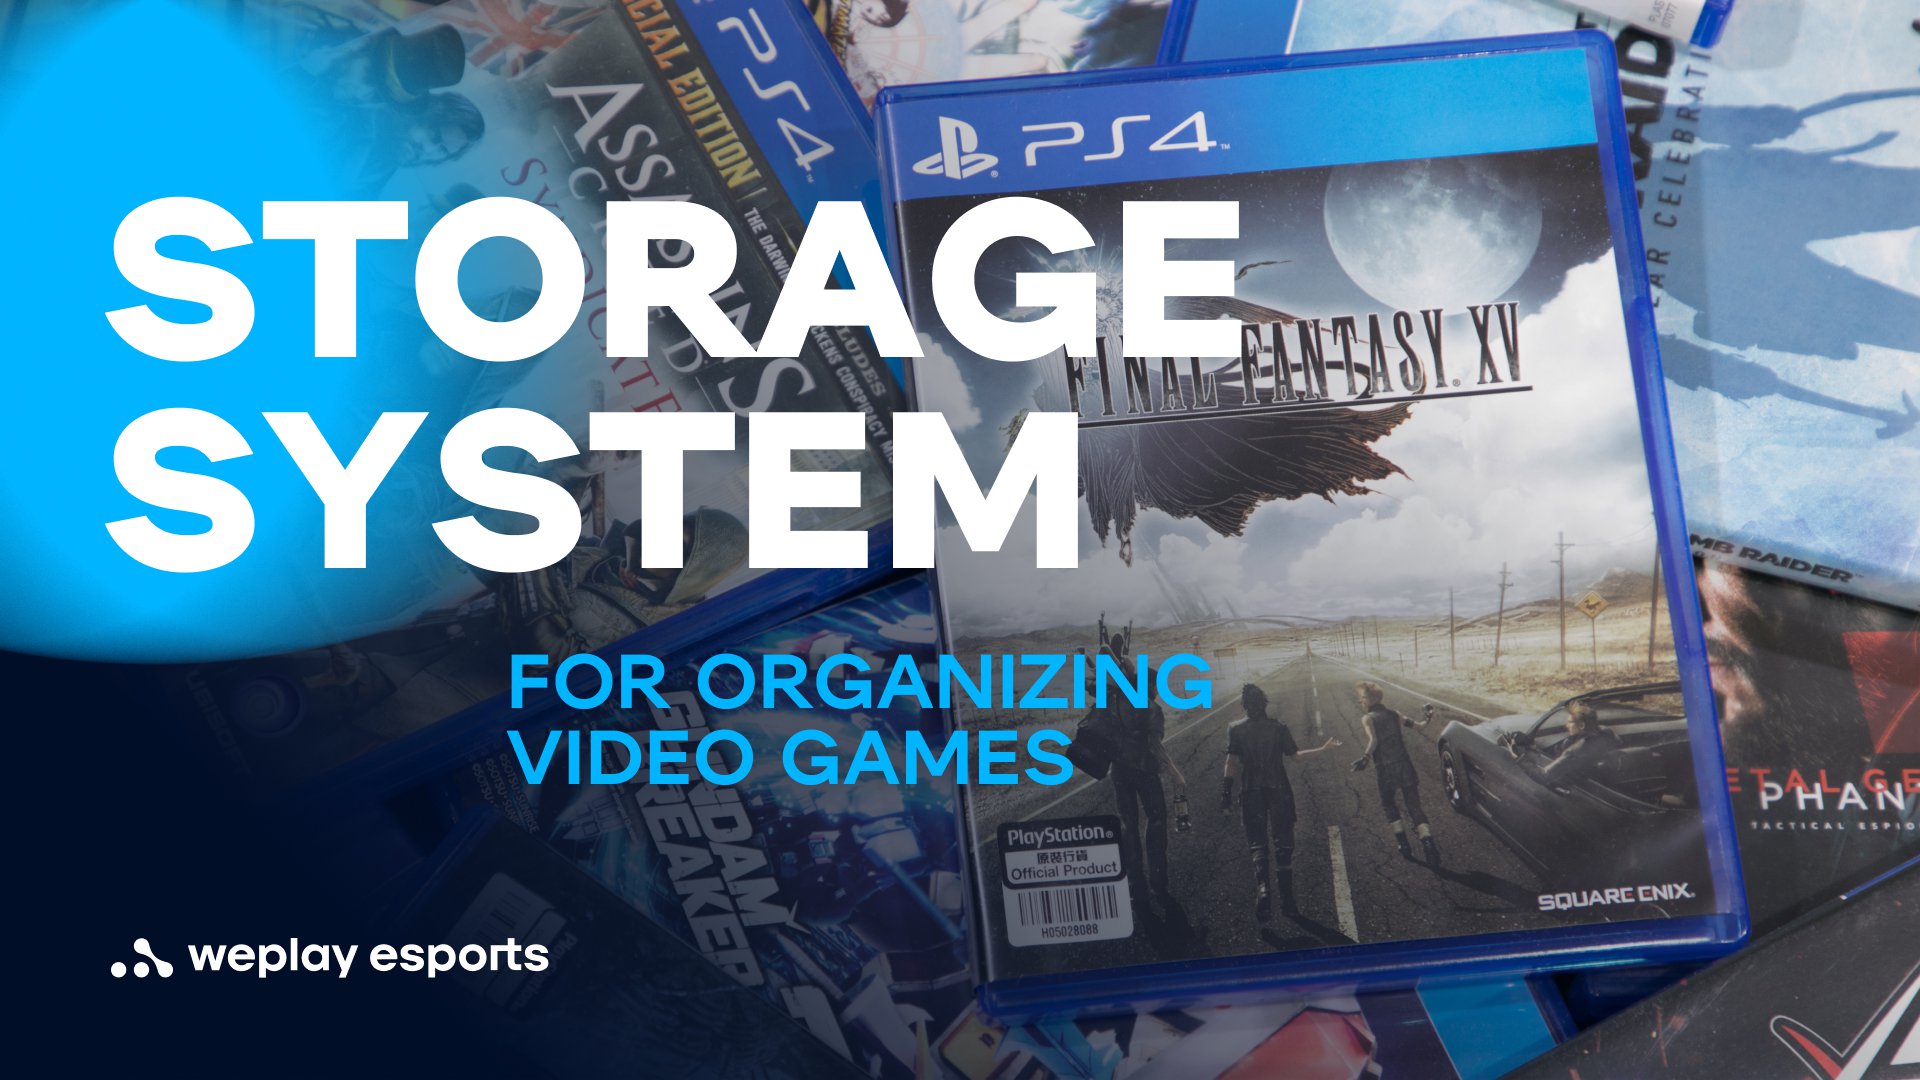 Storage system for organizing video games. Credit: WePlay Holding